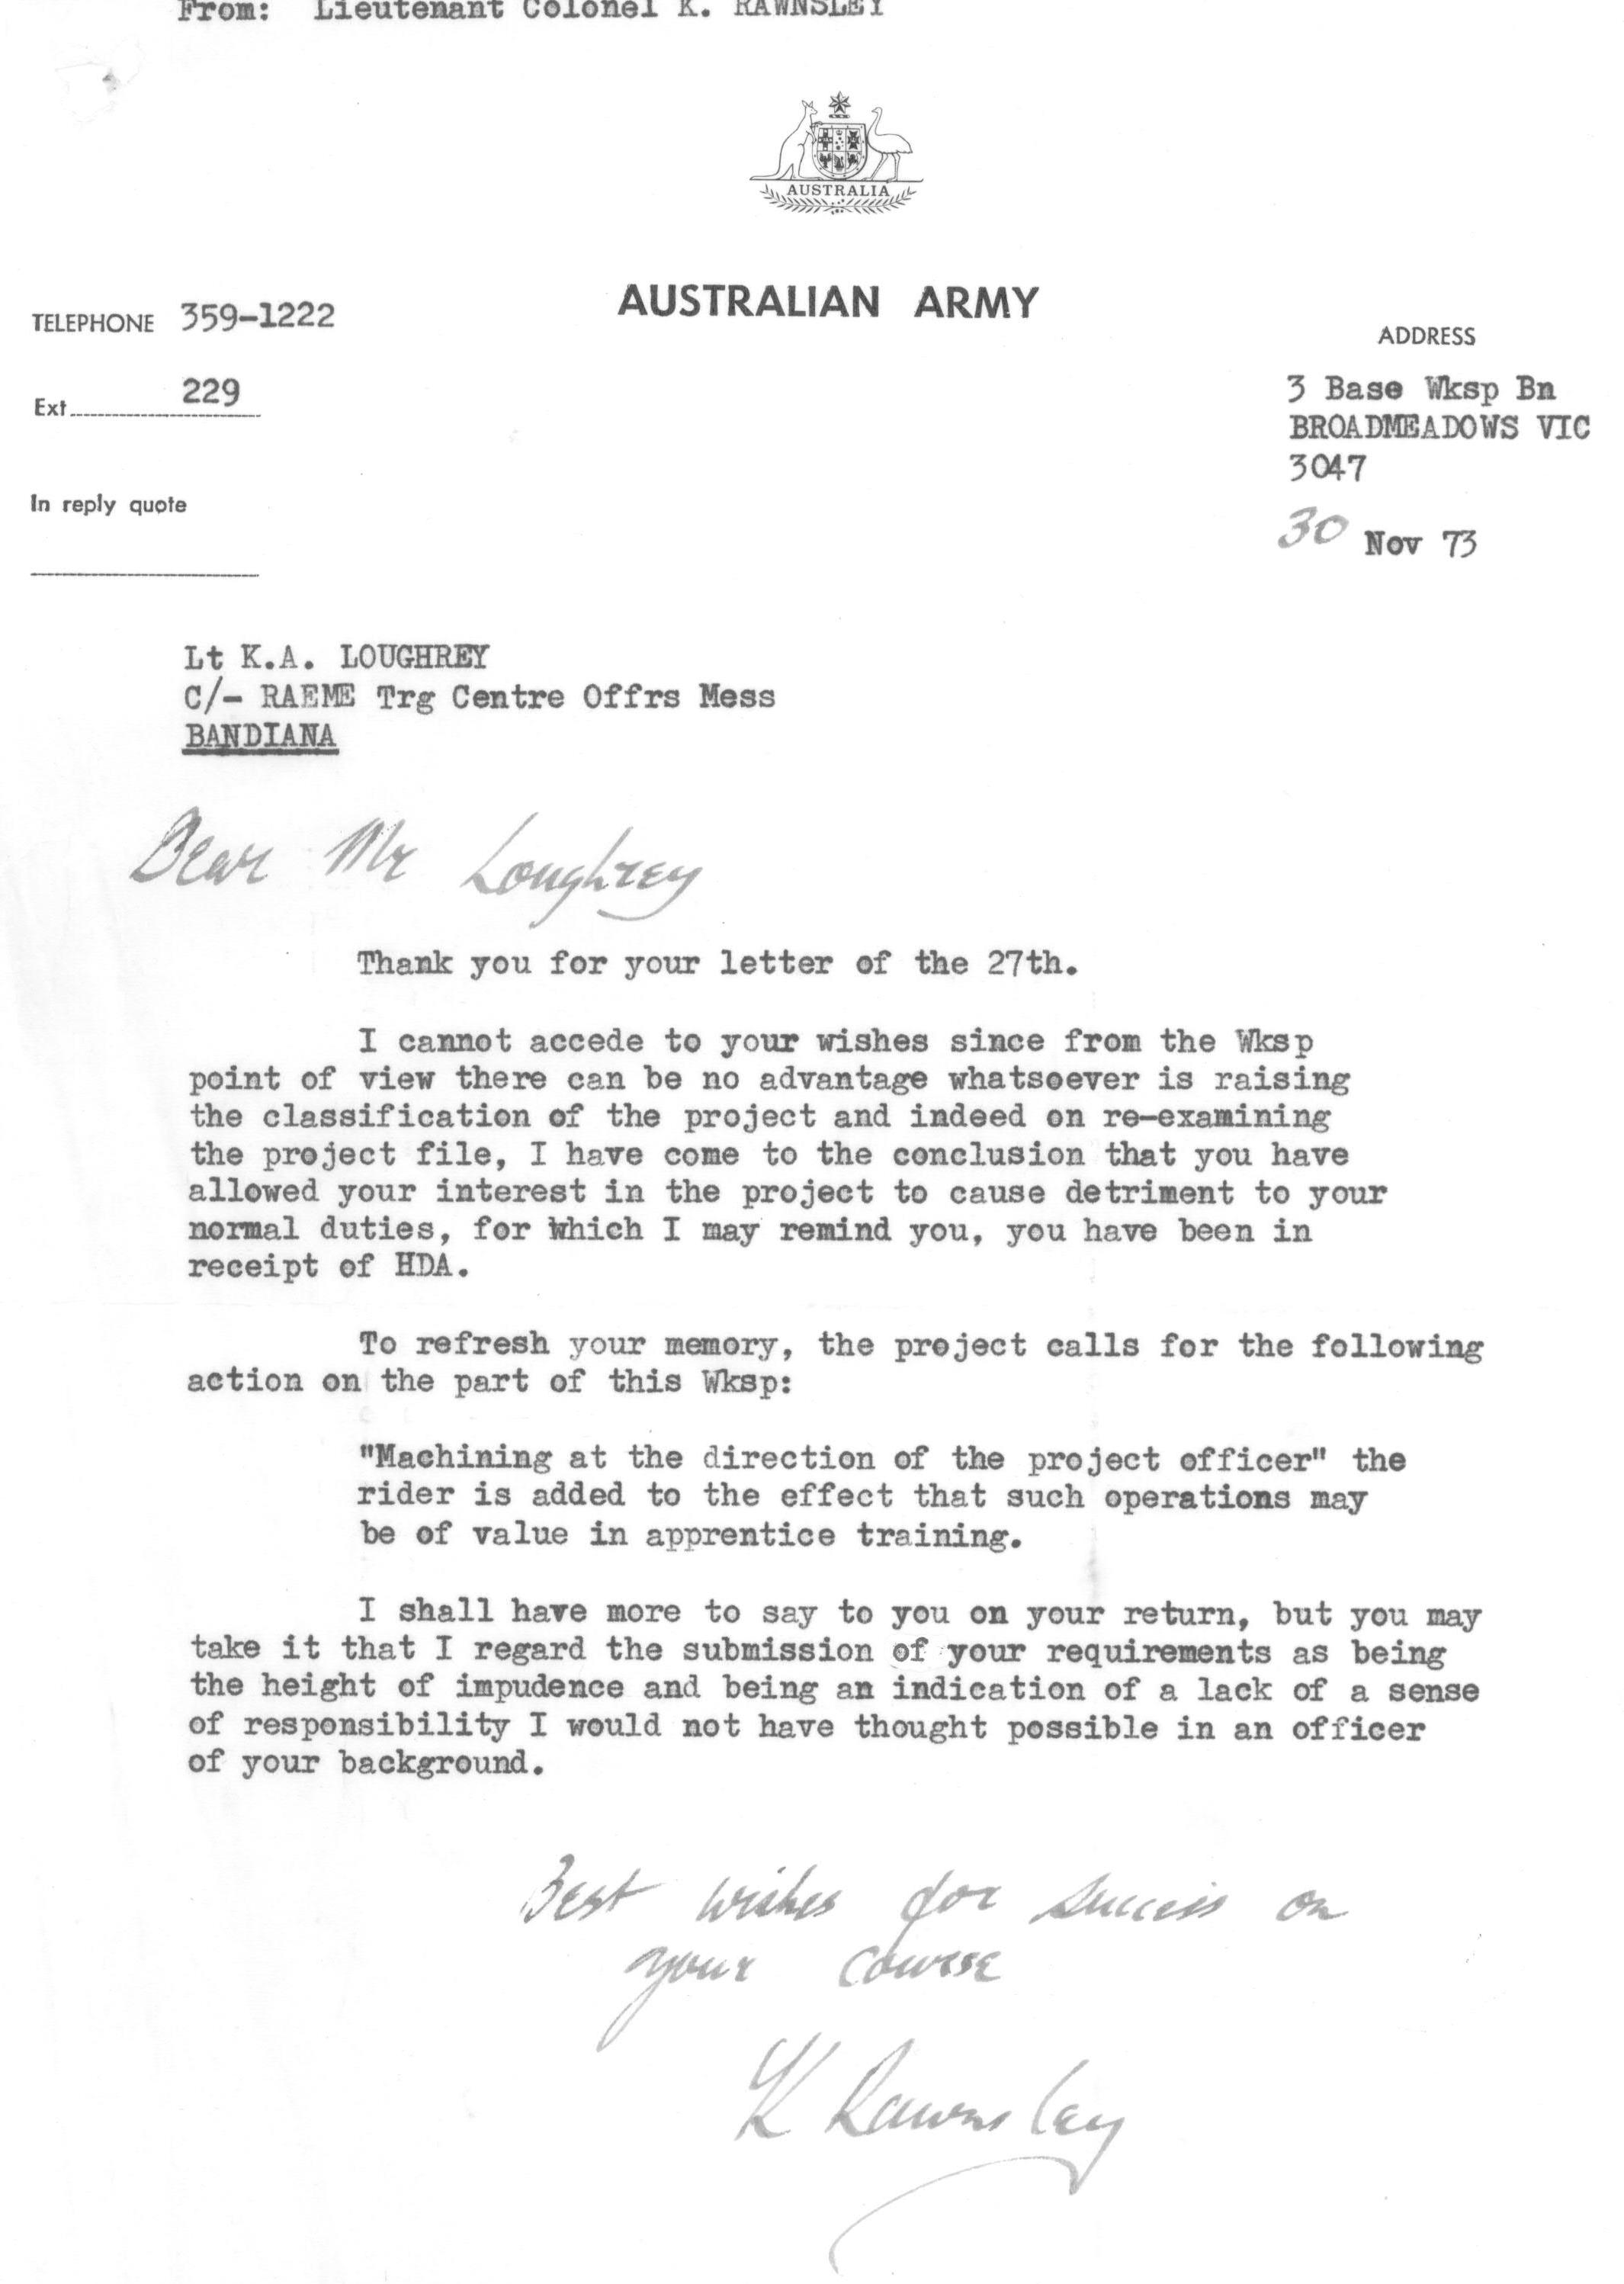 Letter LtColK. Rawnsley, Commanding Officer, 3 Base Wksp, 
              rebuking LT K.A. Loughrey for asking to be placed in command of GE Company to facilitate further work on the prototype rifle, dated -30 November 1973